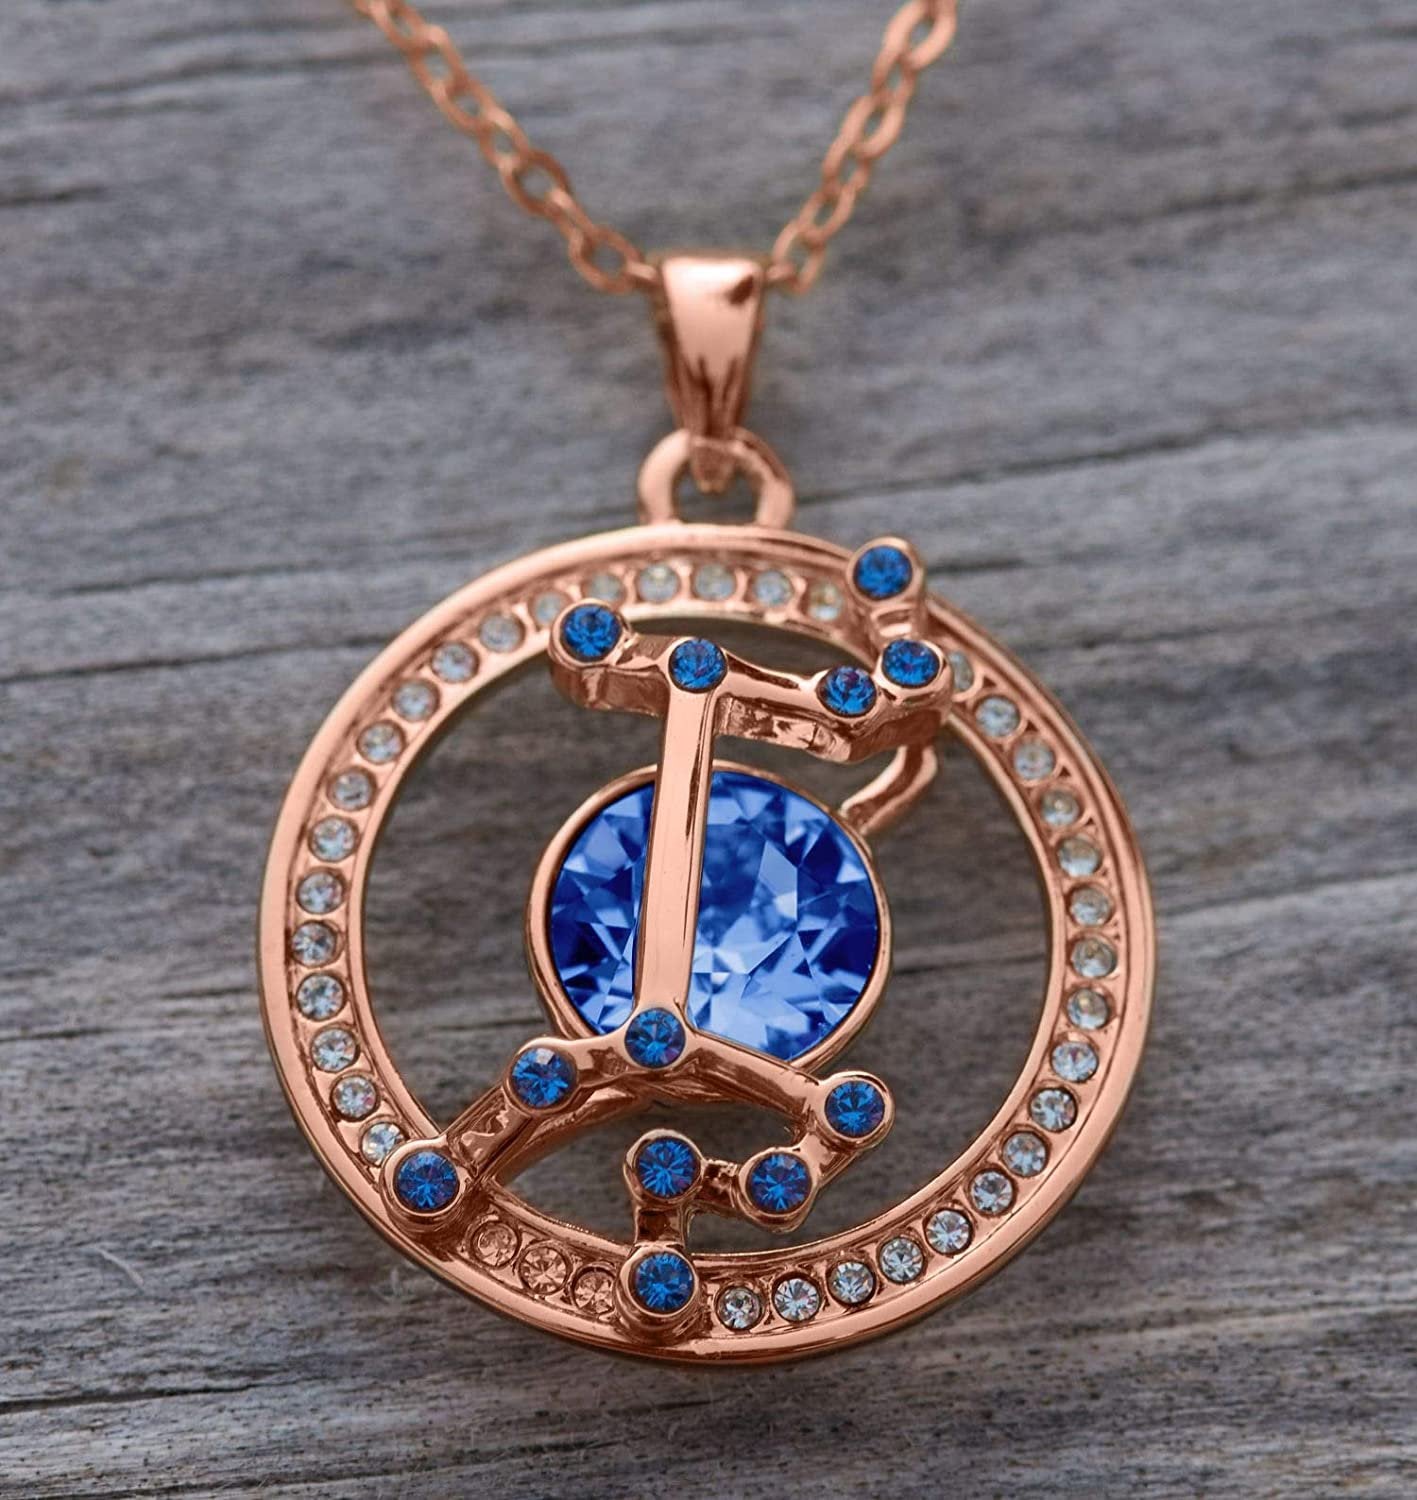 Leafael "Superstar Zodiac Constellation Pendant Necklace Made with Premium Crystal Horoscope Jewelry, Gold or Rose Gold Plated, 18"+ 2"